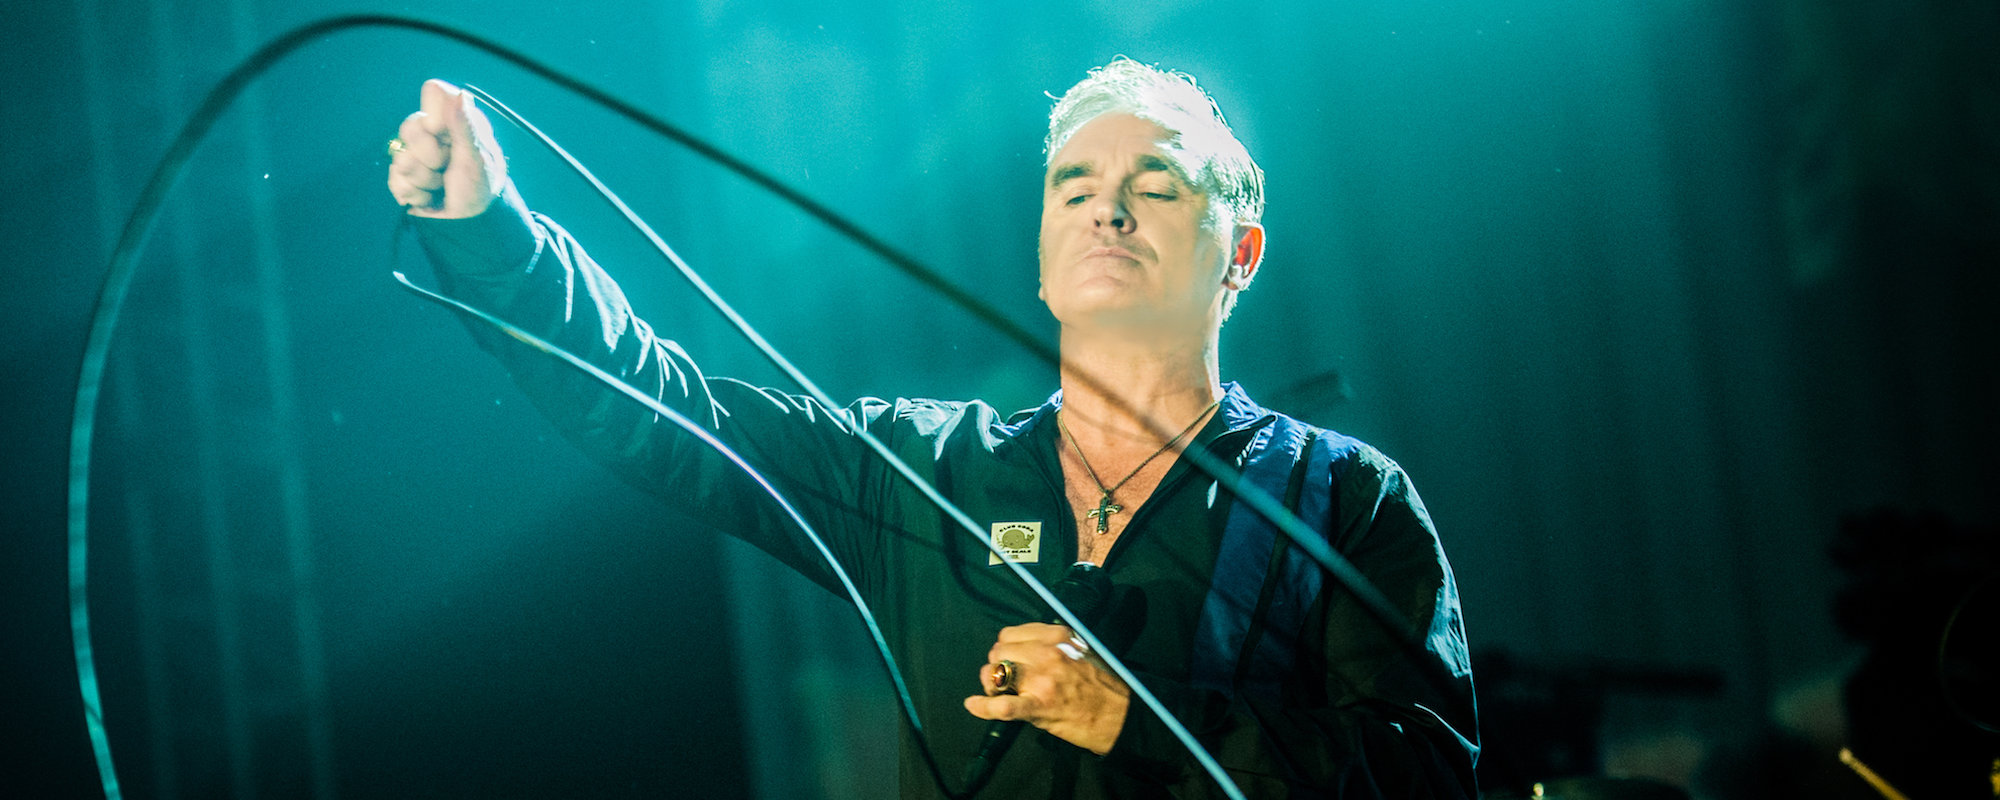 During Second Tour Stop, Morrissey Leaves Show 9 Songs in; New Record Now on Hold